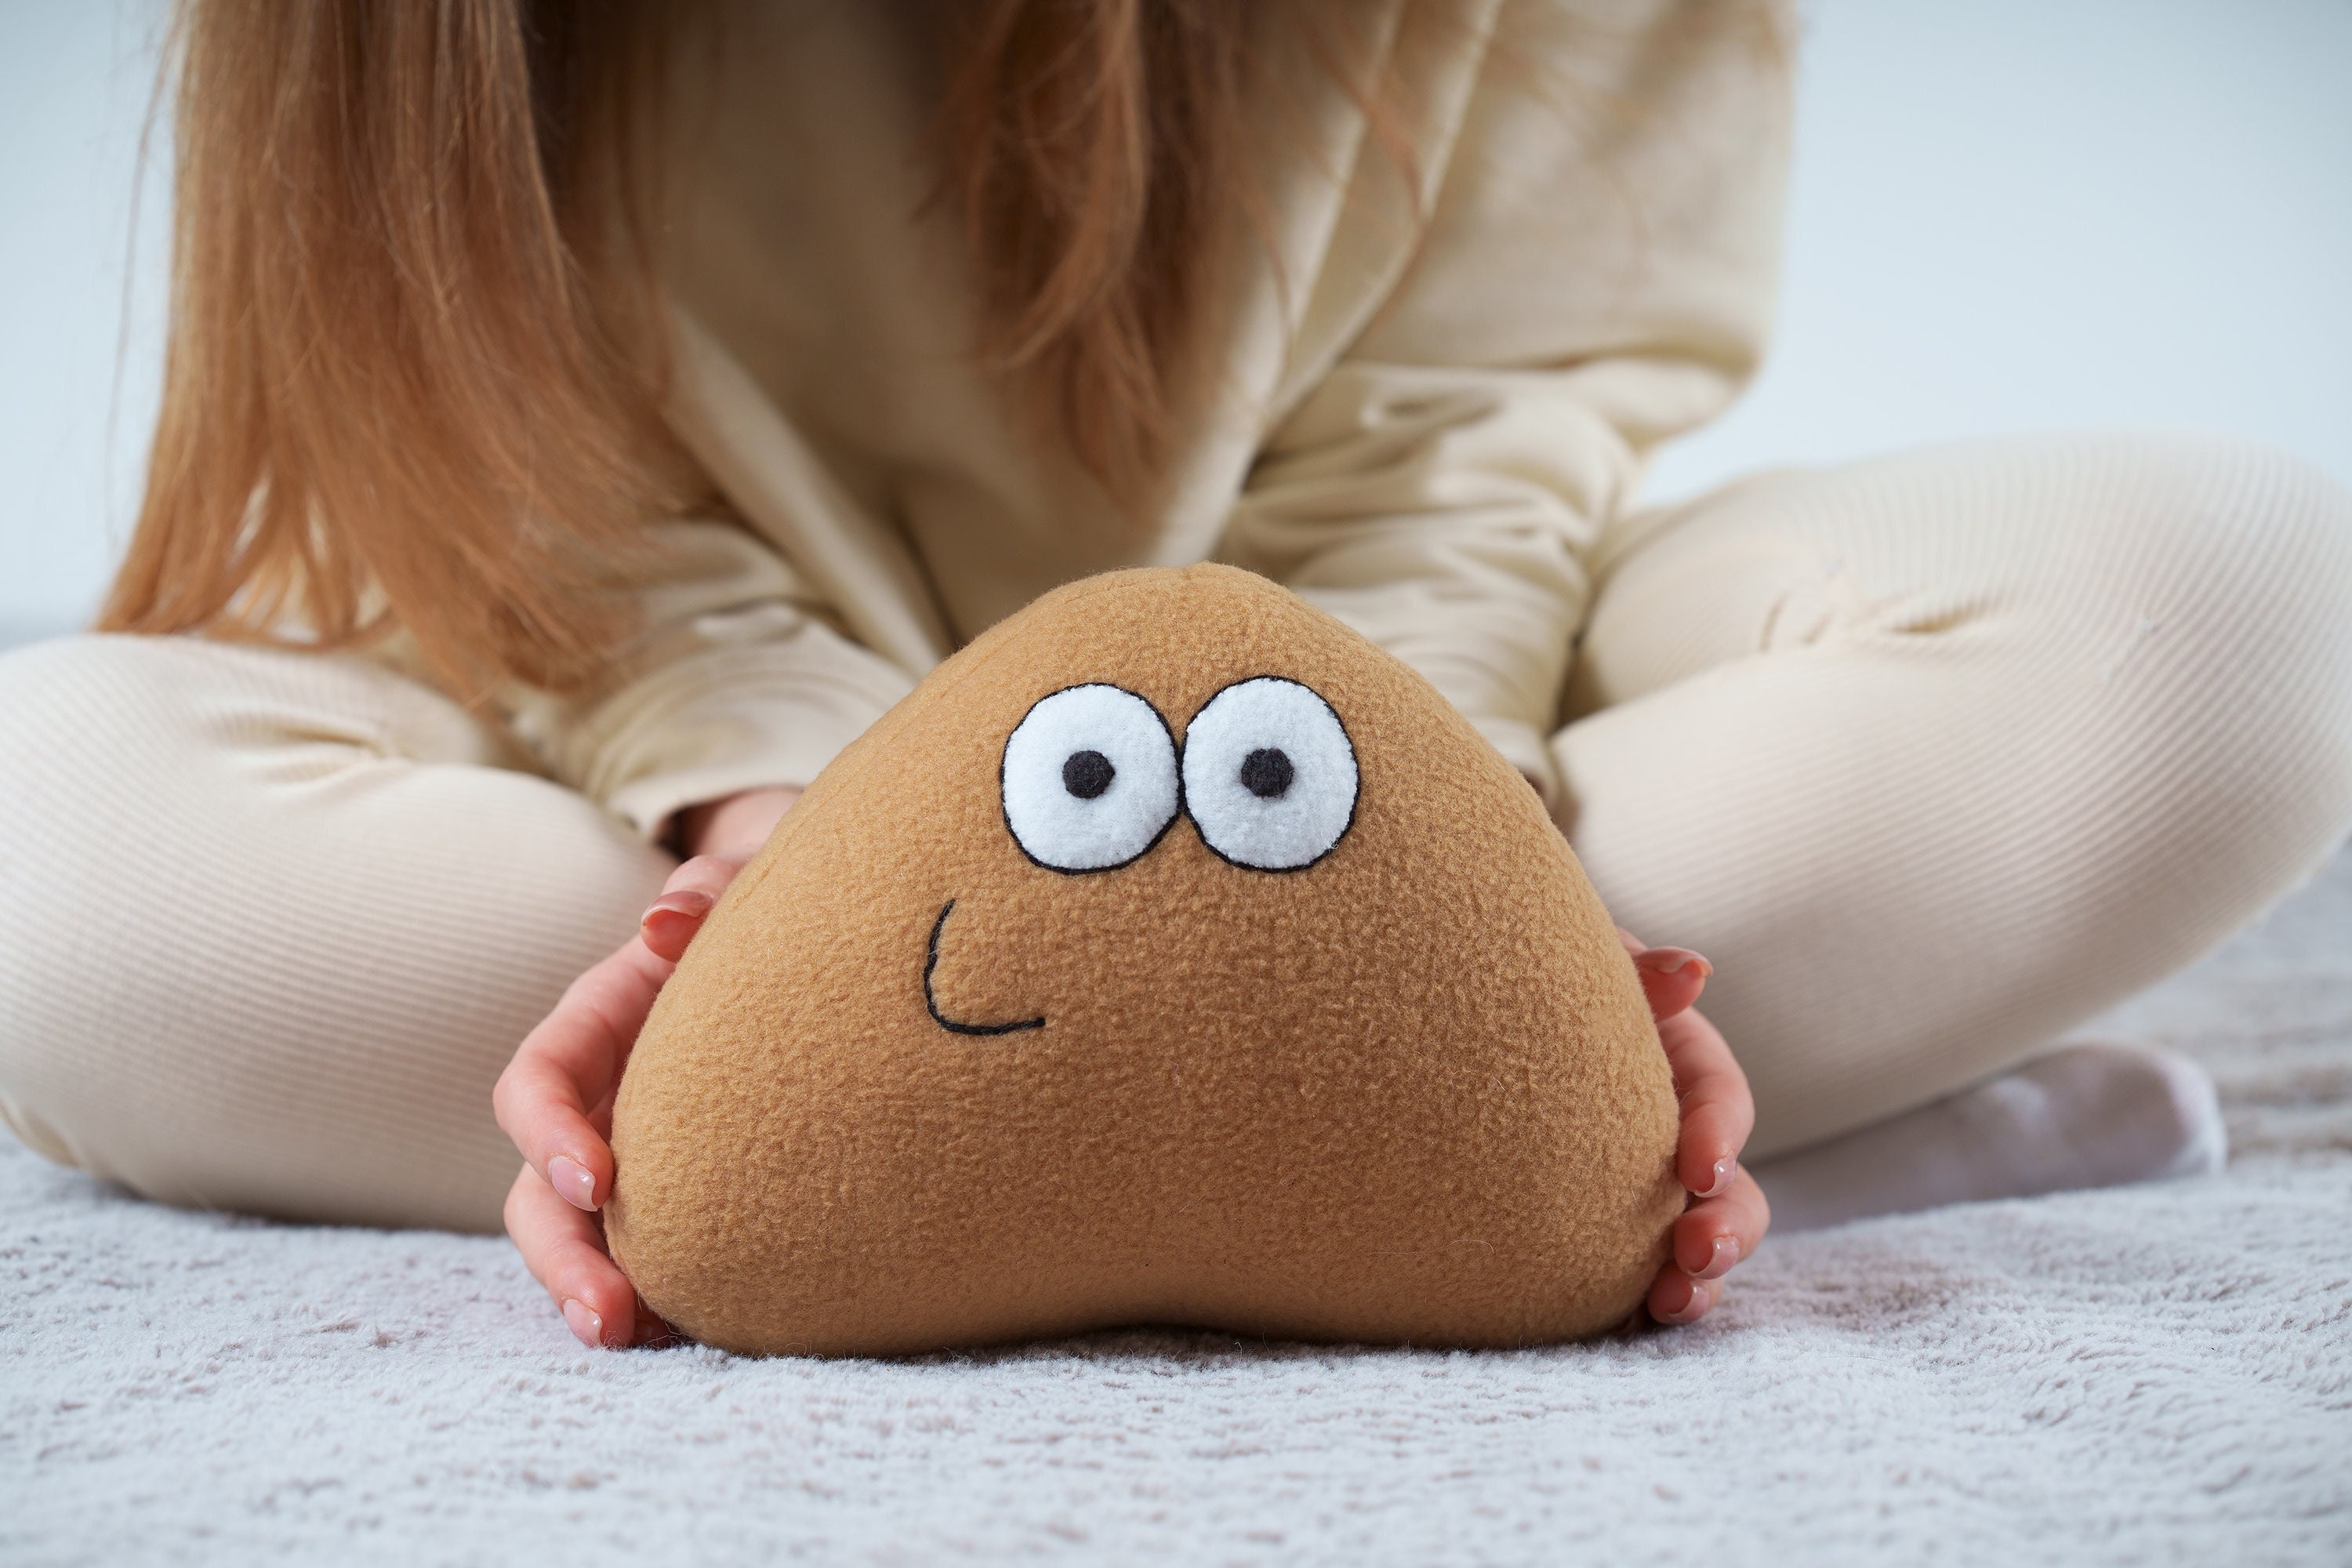 My Pet Alien Pou Plush Handmade Decoration Soft Toy Made To Order 8 in -   Italia